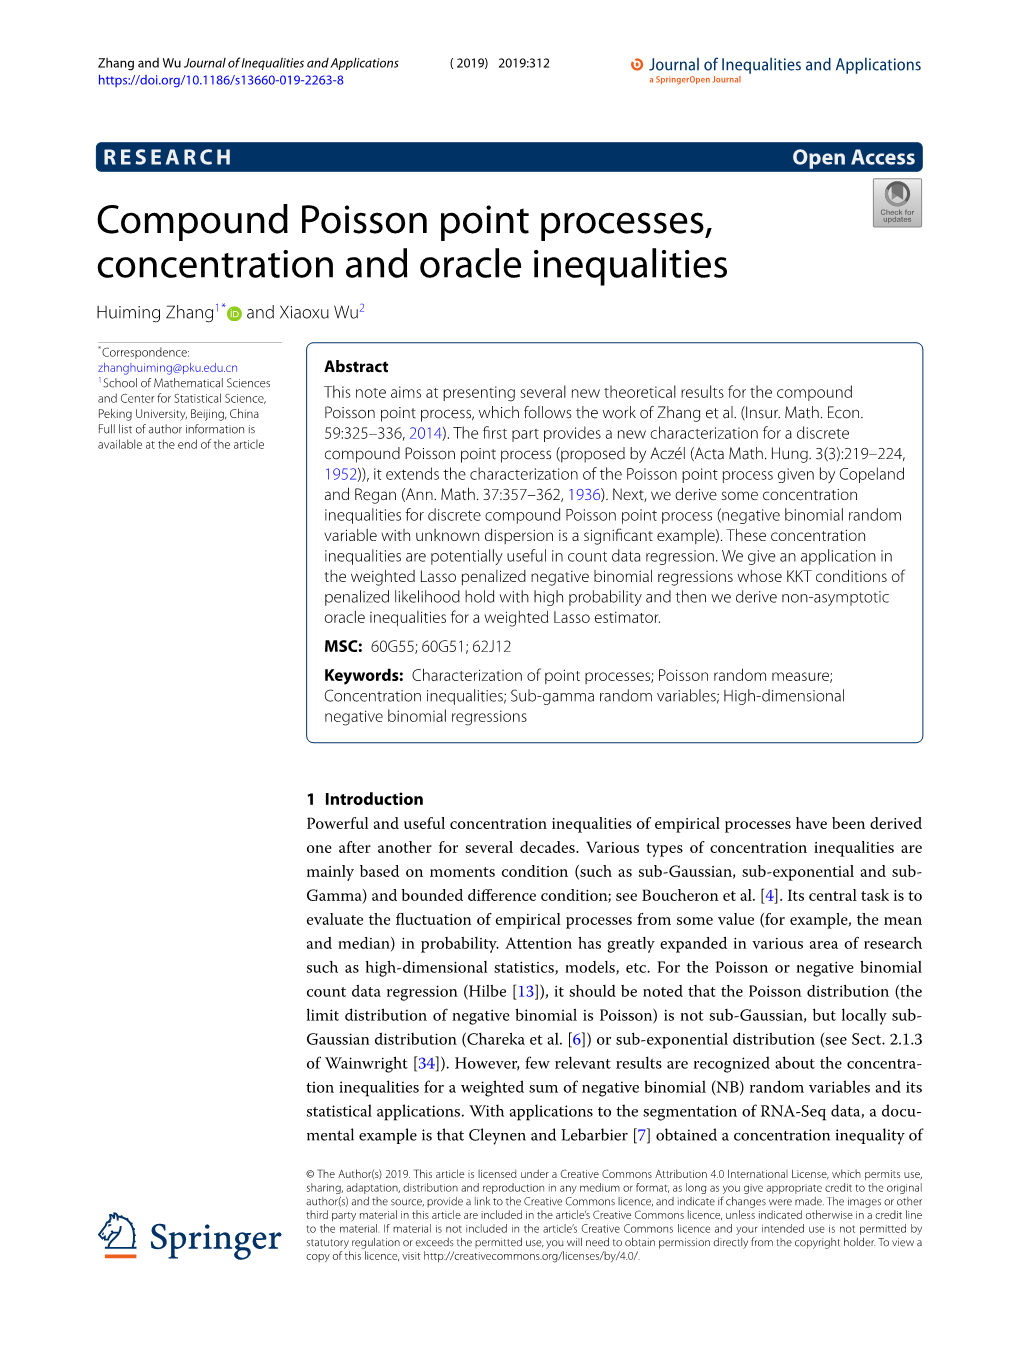 Compound Poisson Point Processes, Concentration and Oracle Inequalities Huiming Zhang1* and Xiaoxu Wu2